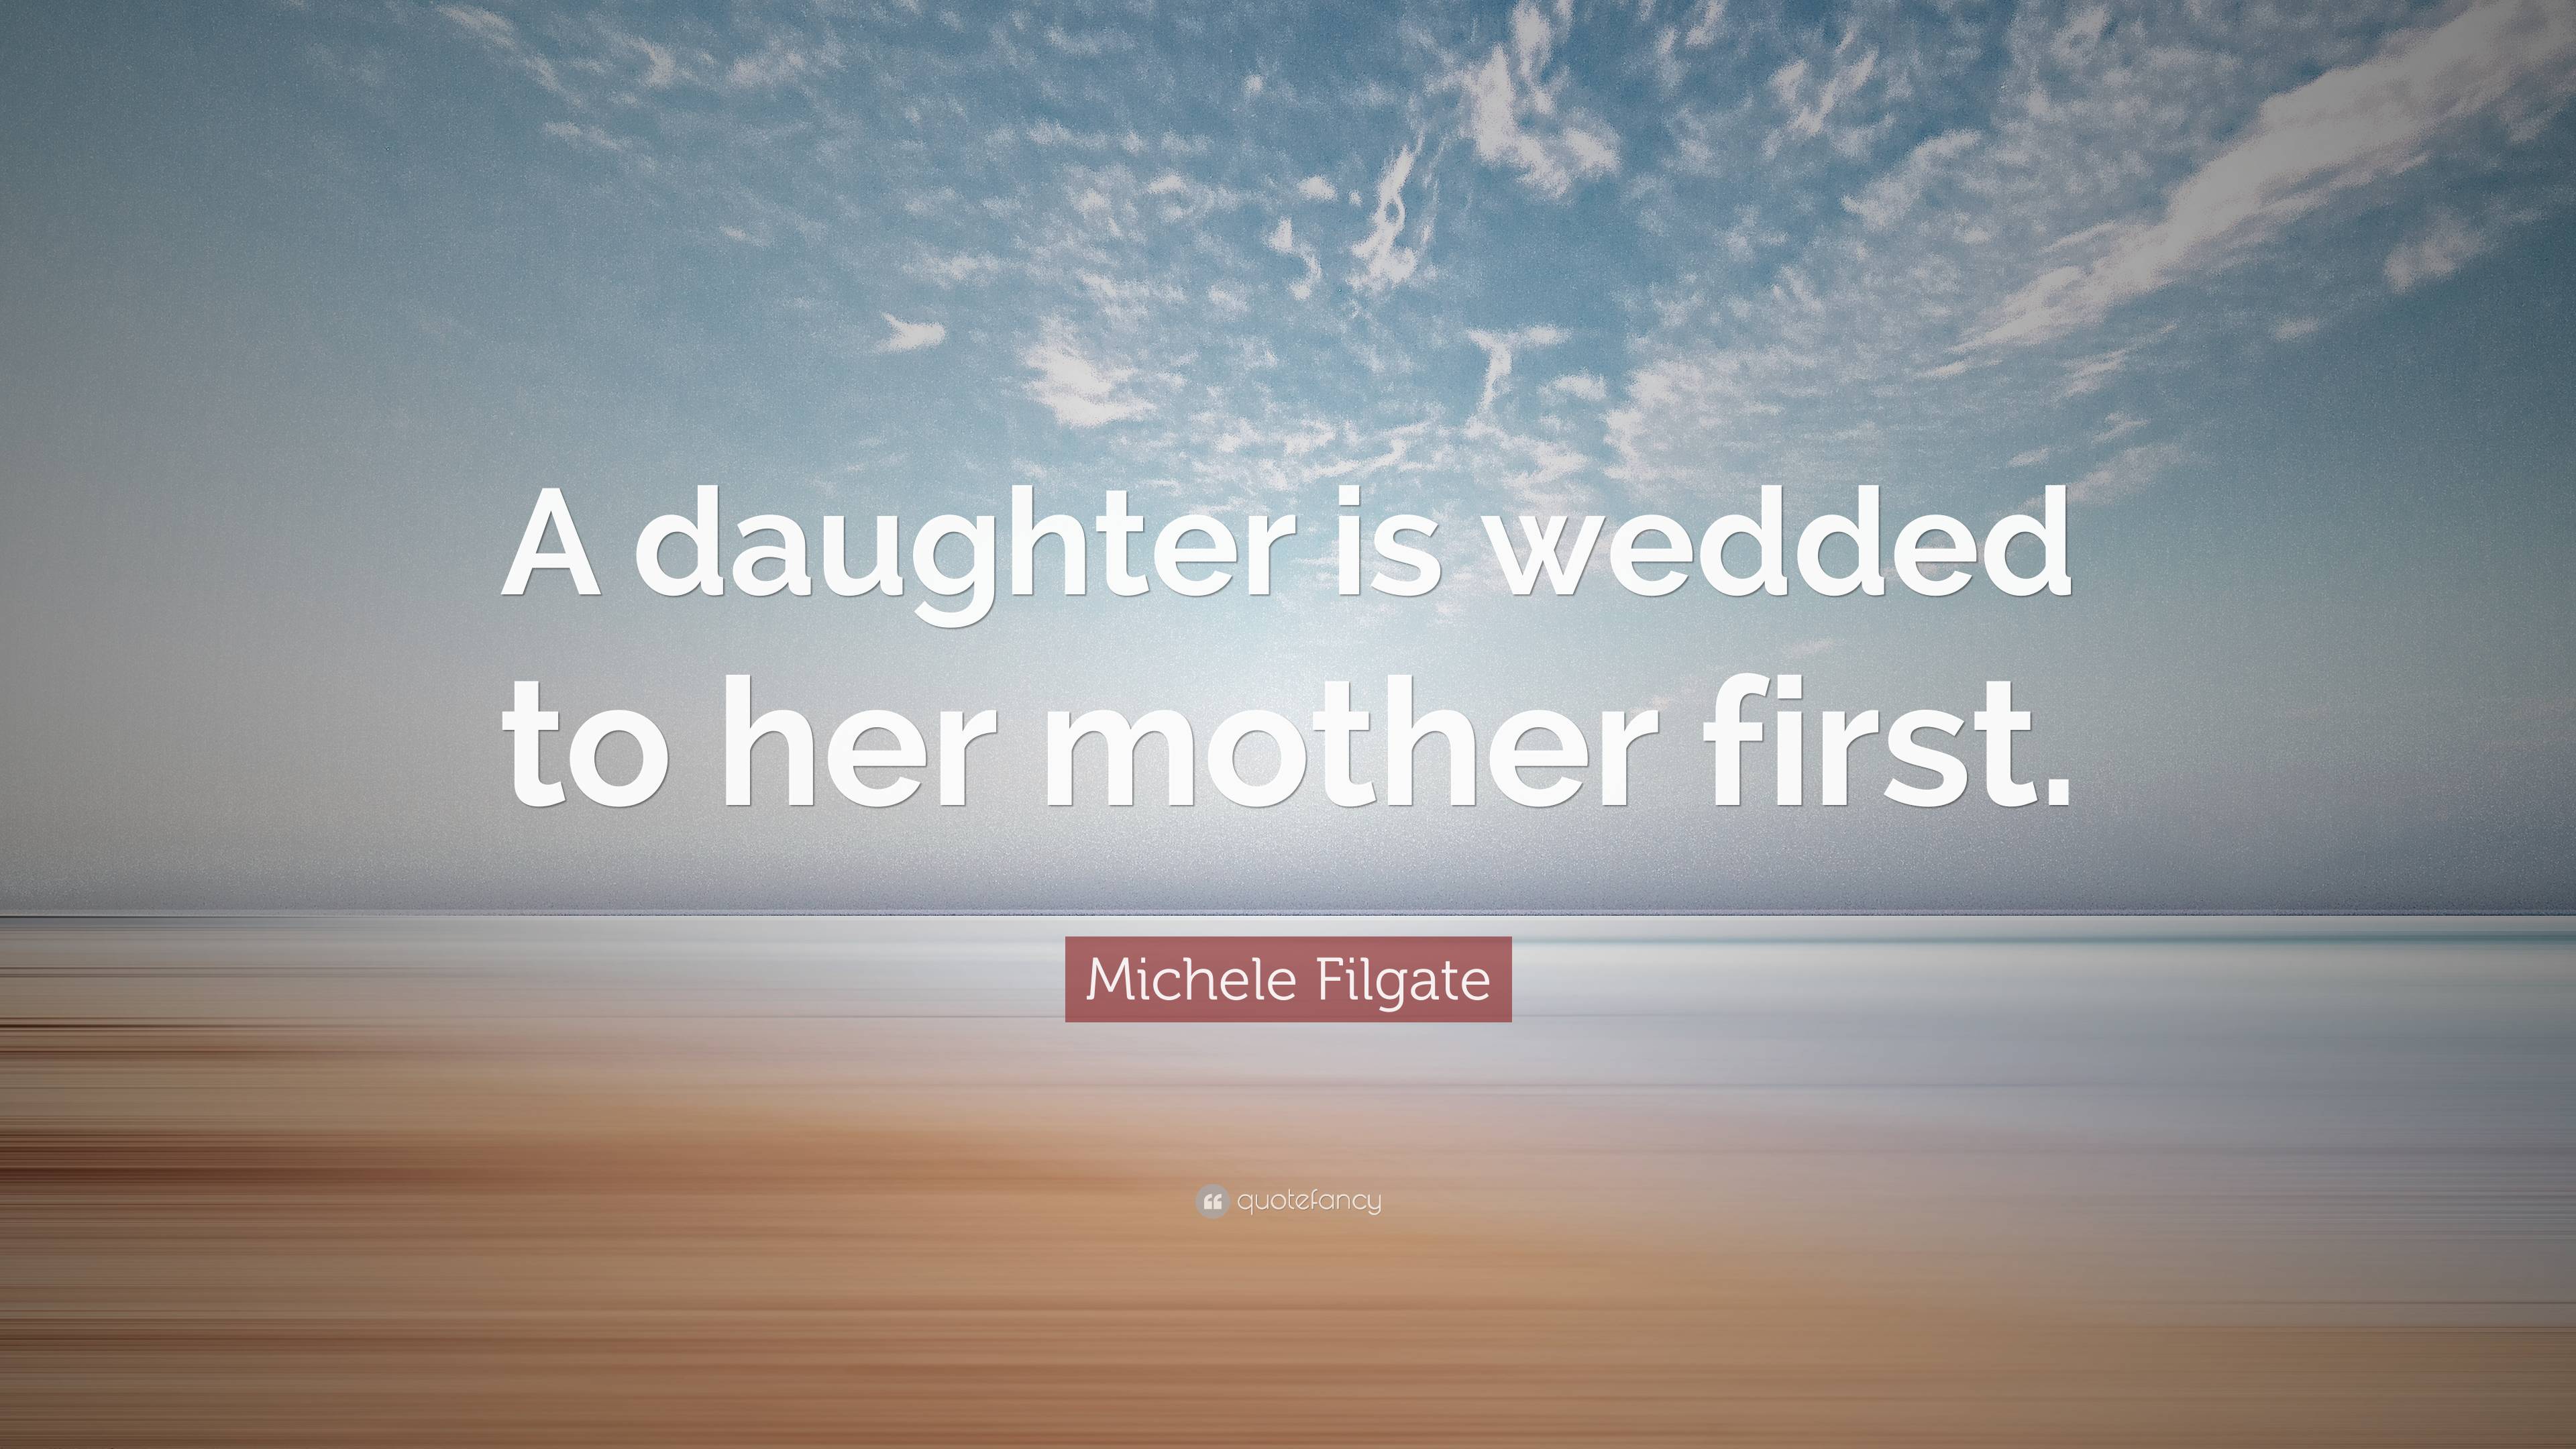 Michele Filgate Quote: “There is a gaping hole perhaps for all of us, where  our mother does not match up with “mother” as we believe it's meant ”